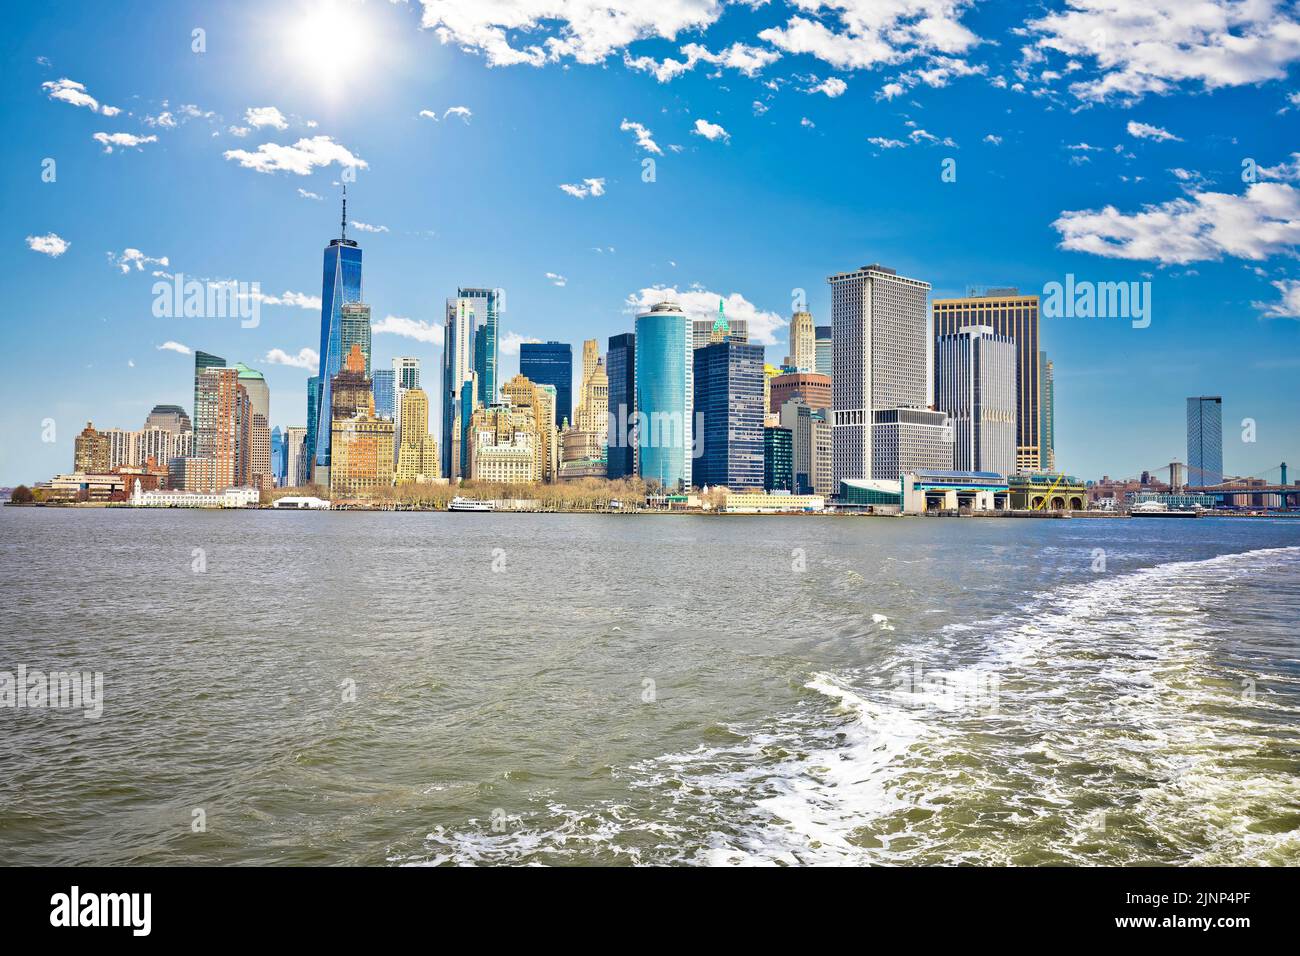 New York City downtown skyline view, United States of America Stock Photo